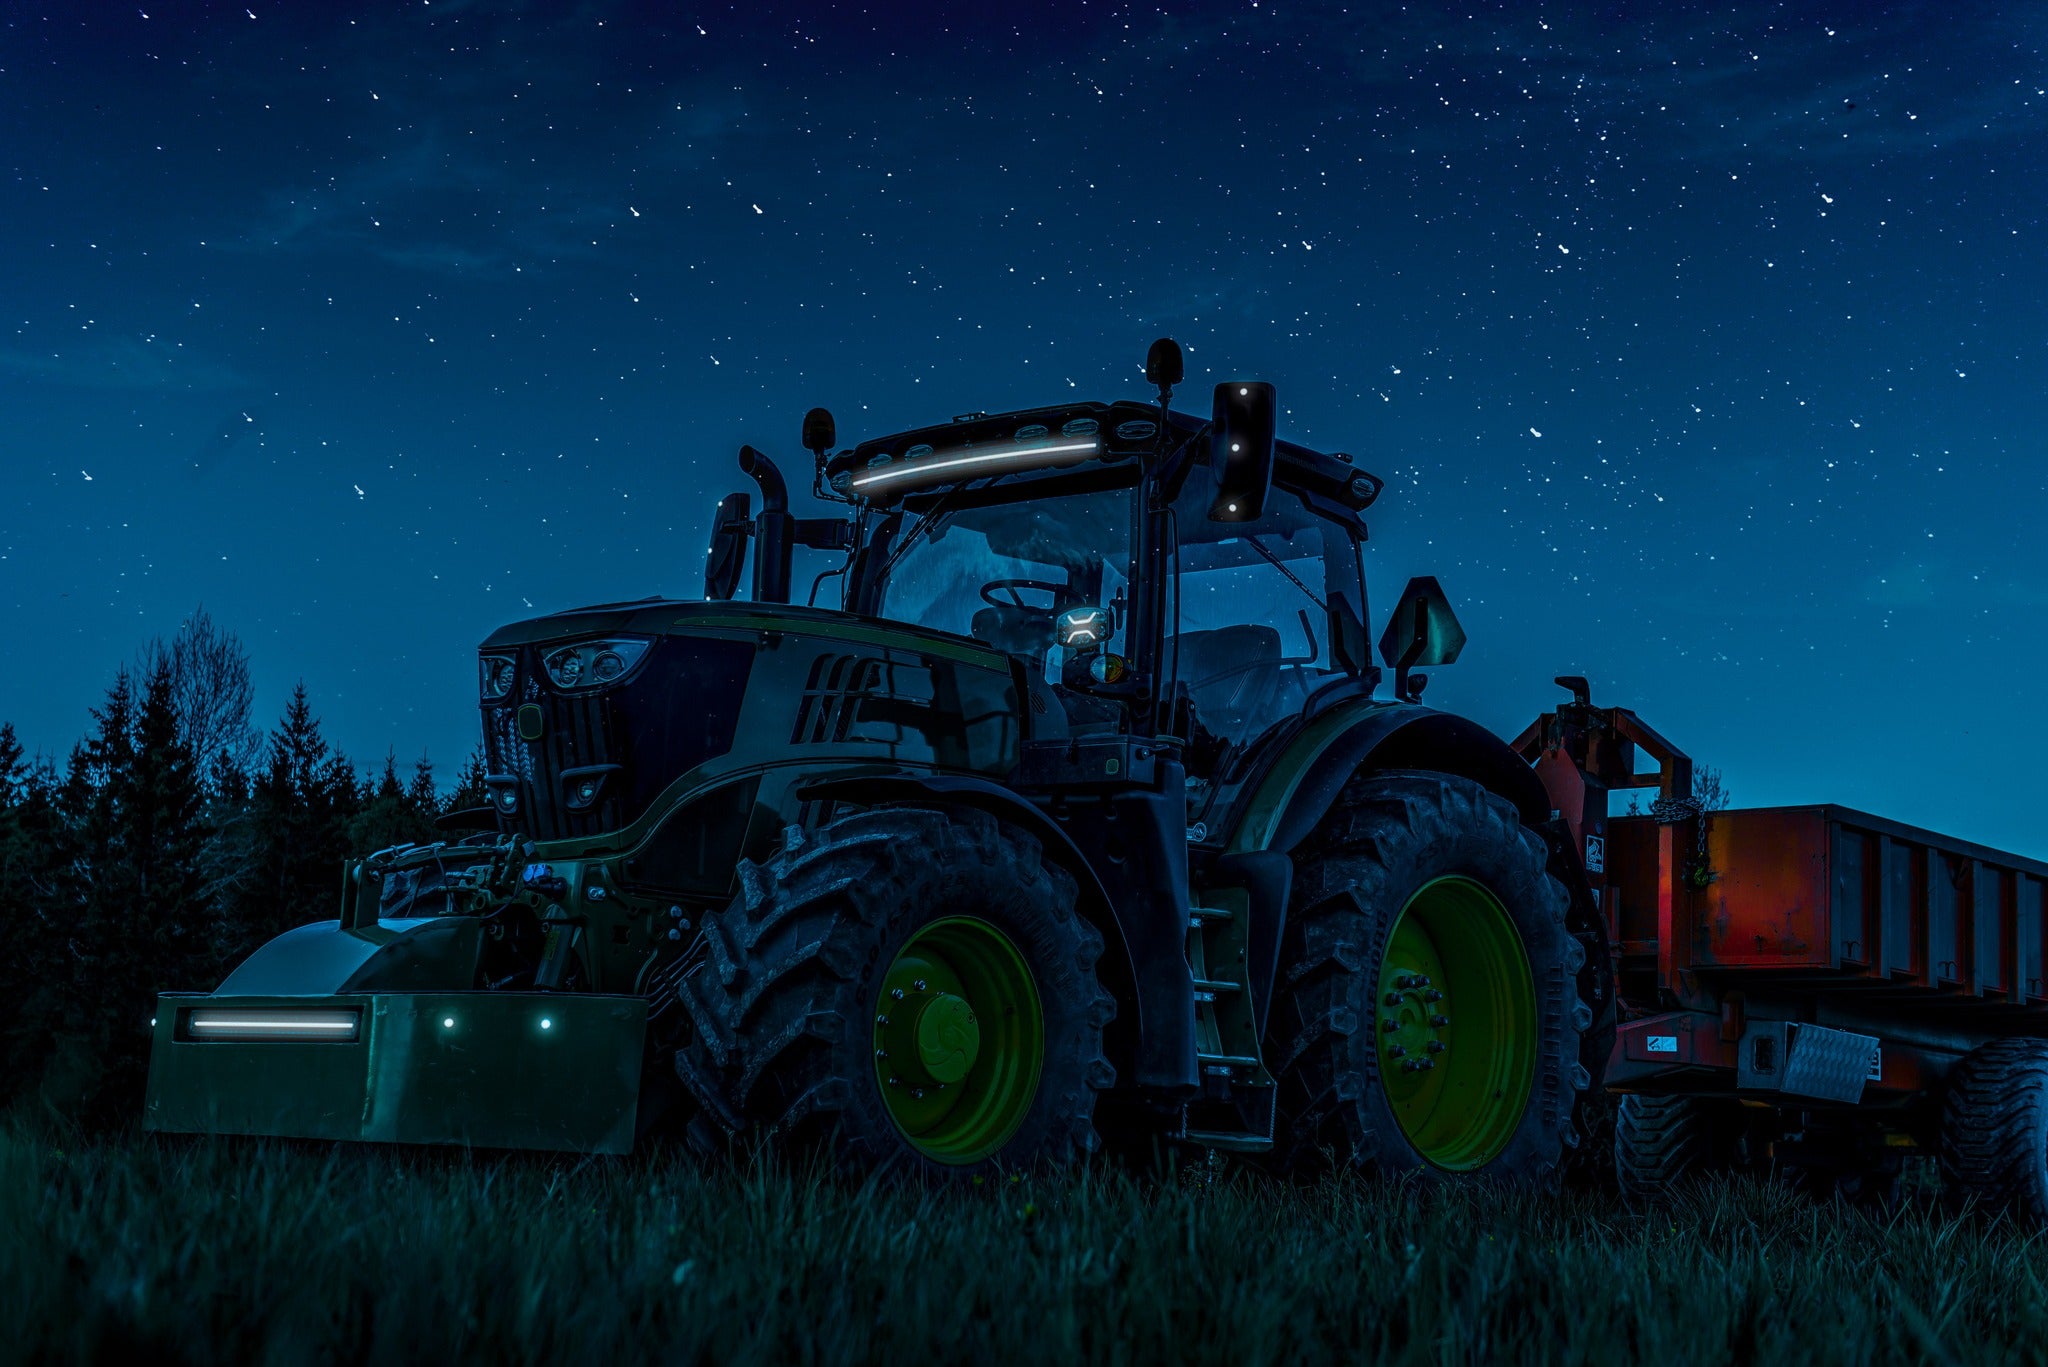 led-lichtbalk op New Holland-tractor